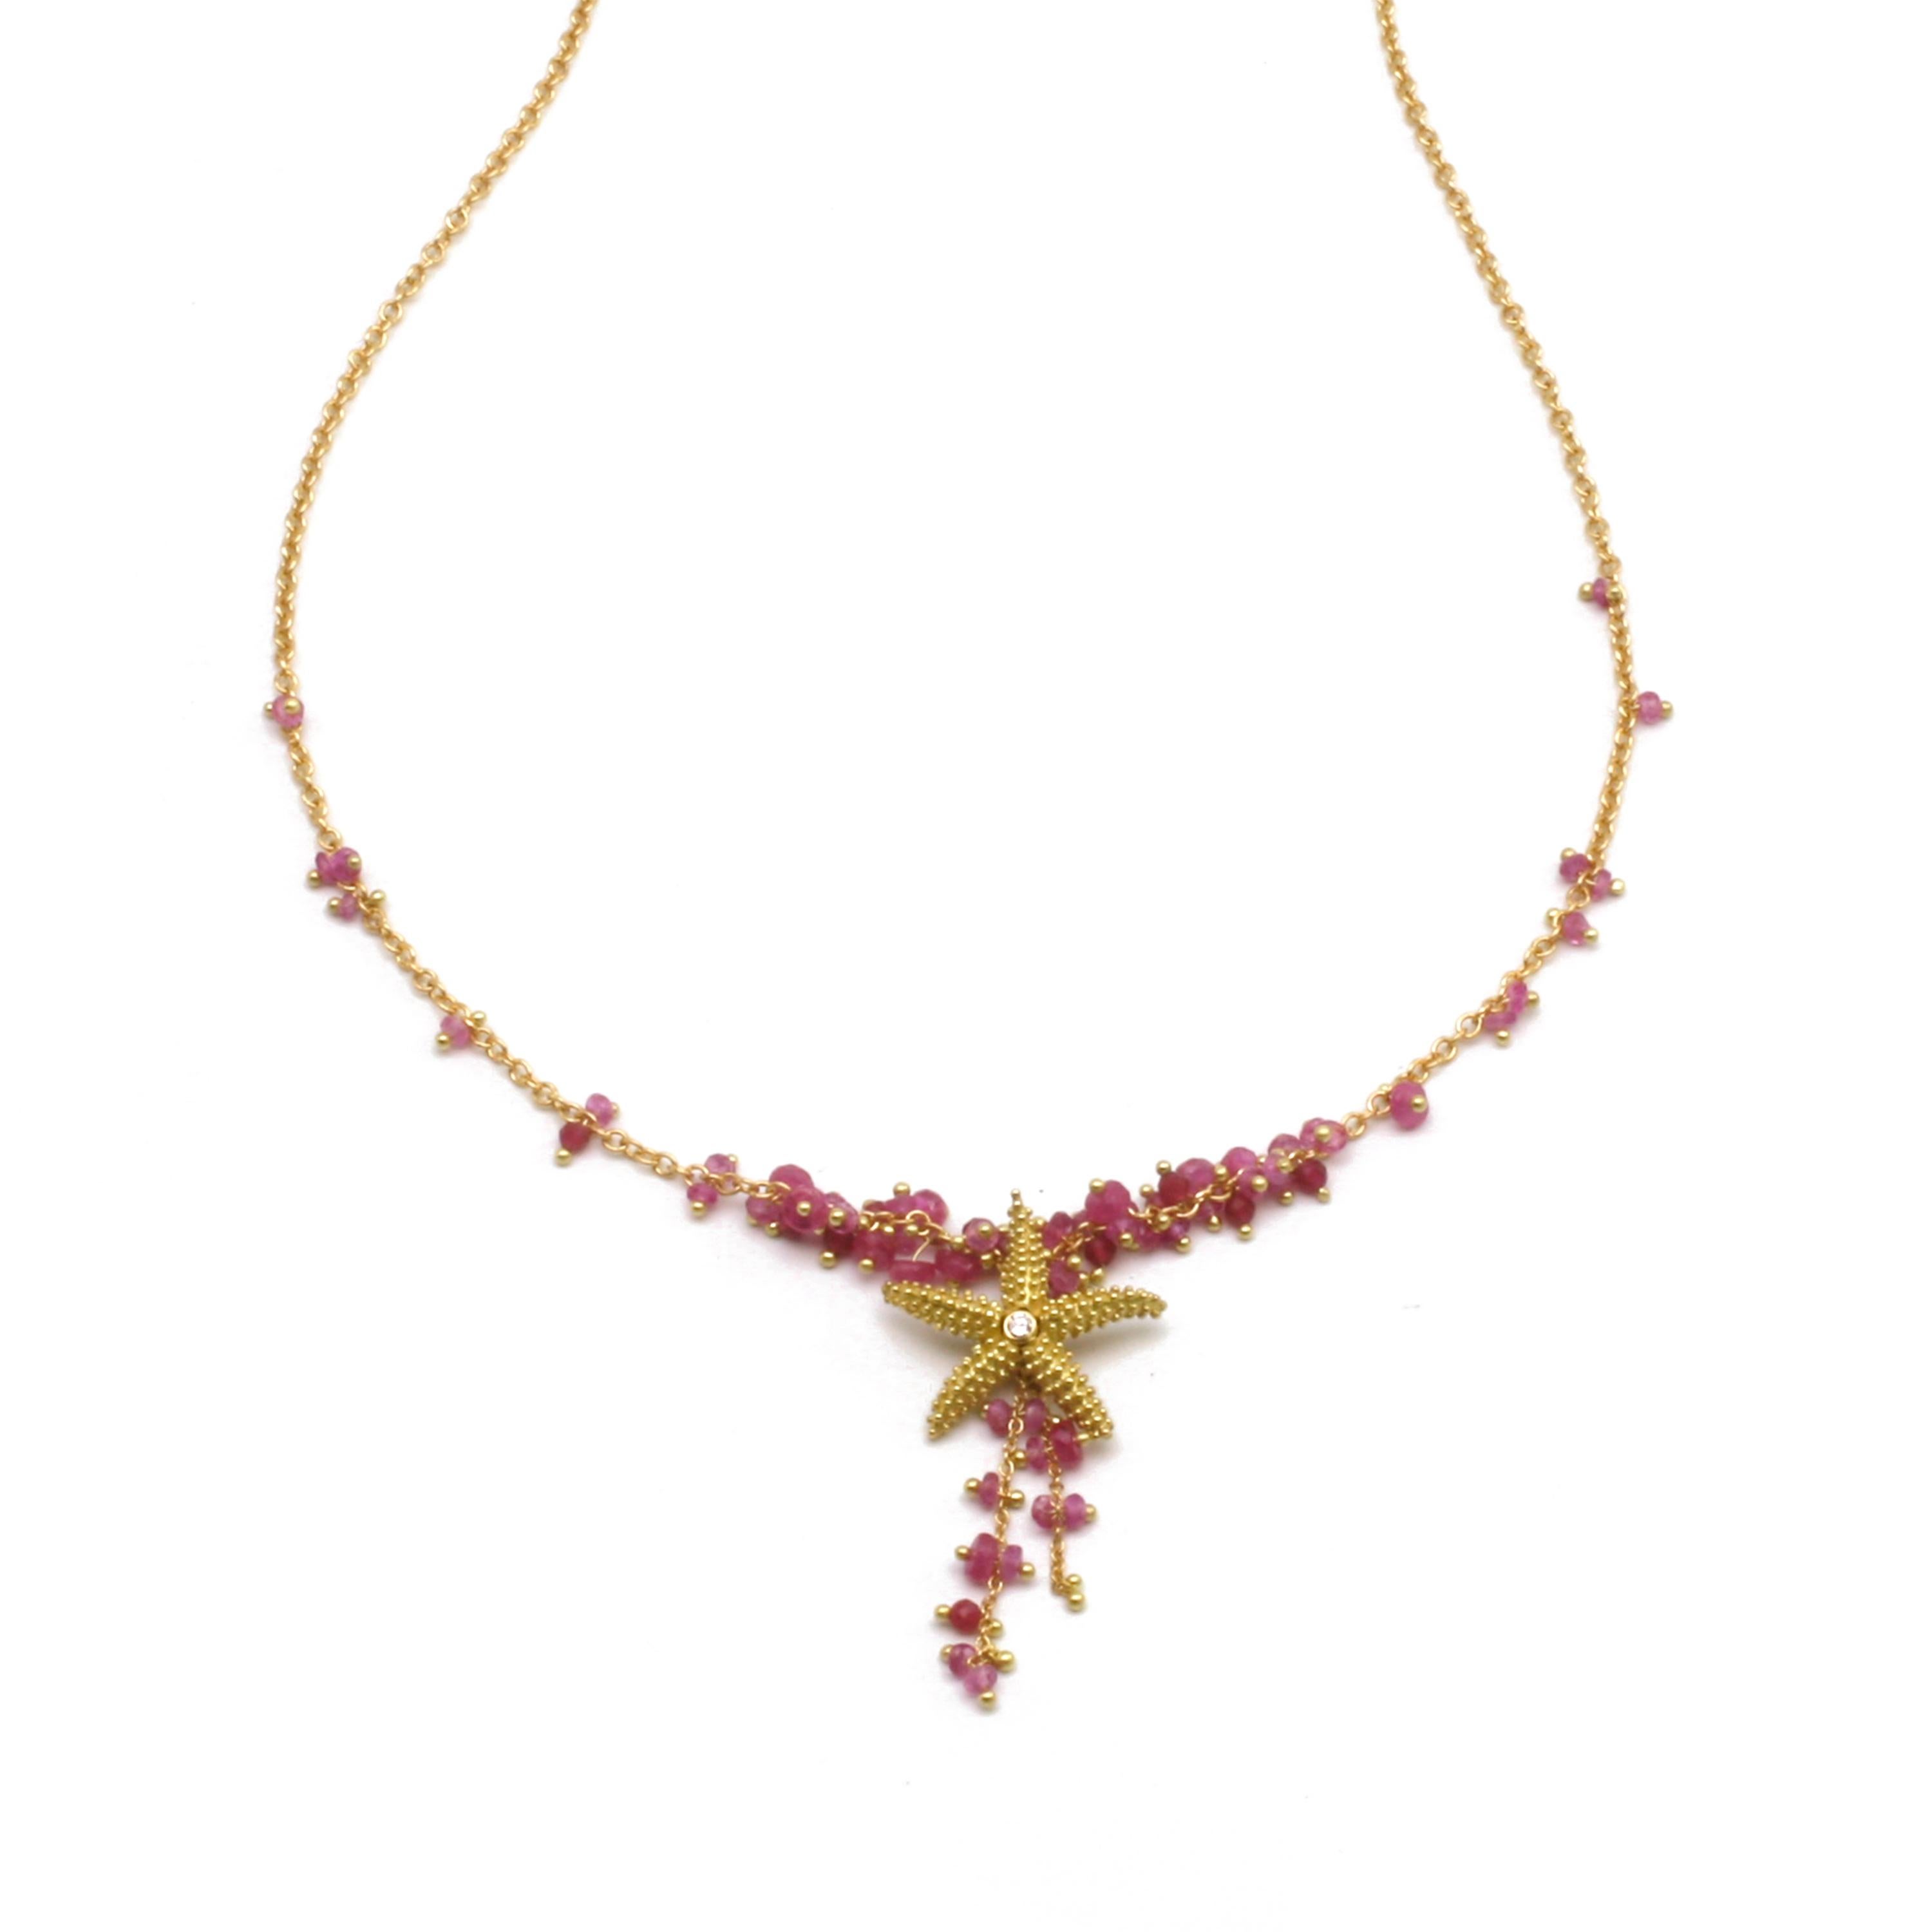 Seastar Necklace with faceted Pink Sapphire beads in 18k Gold.  17 inches. Deep Pink Sapphire beads run throughout the 18k chain that suspends the 18k sea star. Three strands of Pink Sapphire beads cascade down from the solid gold sea star. Can be